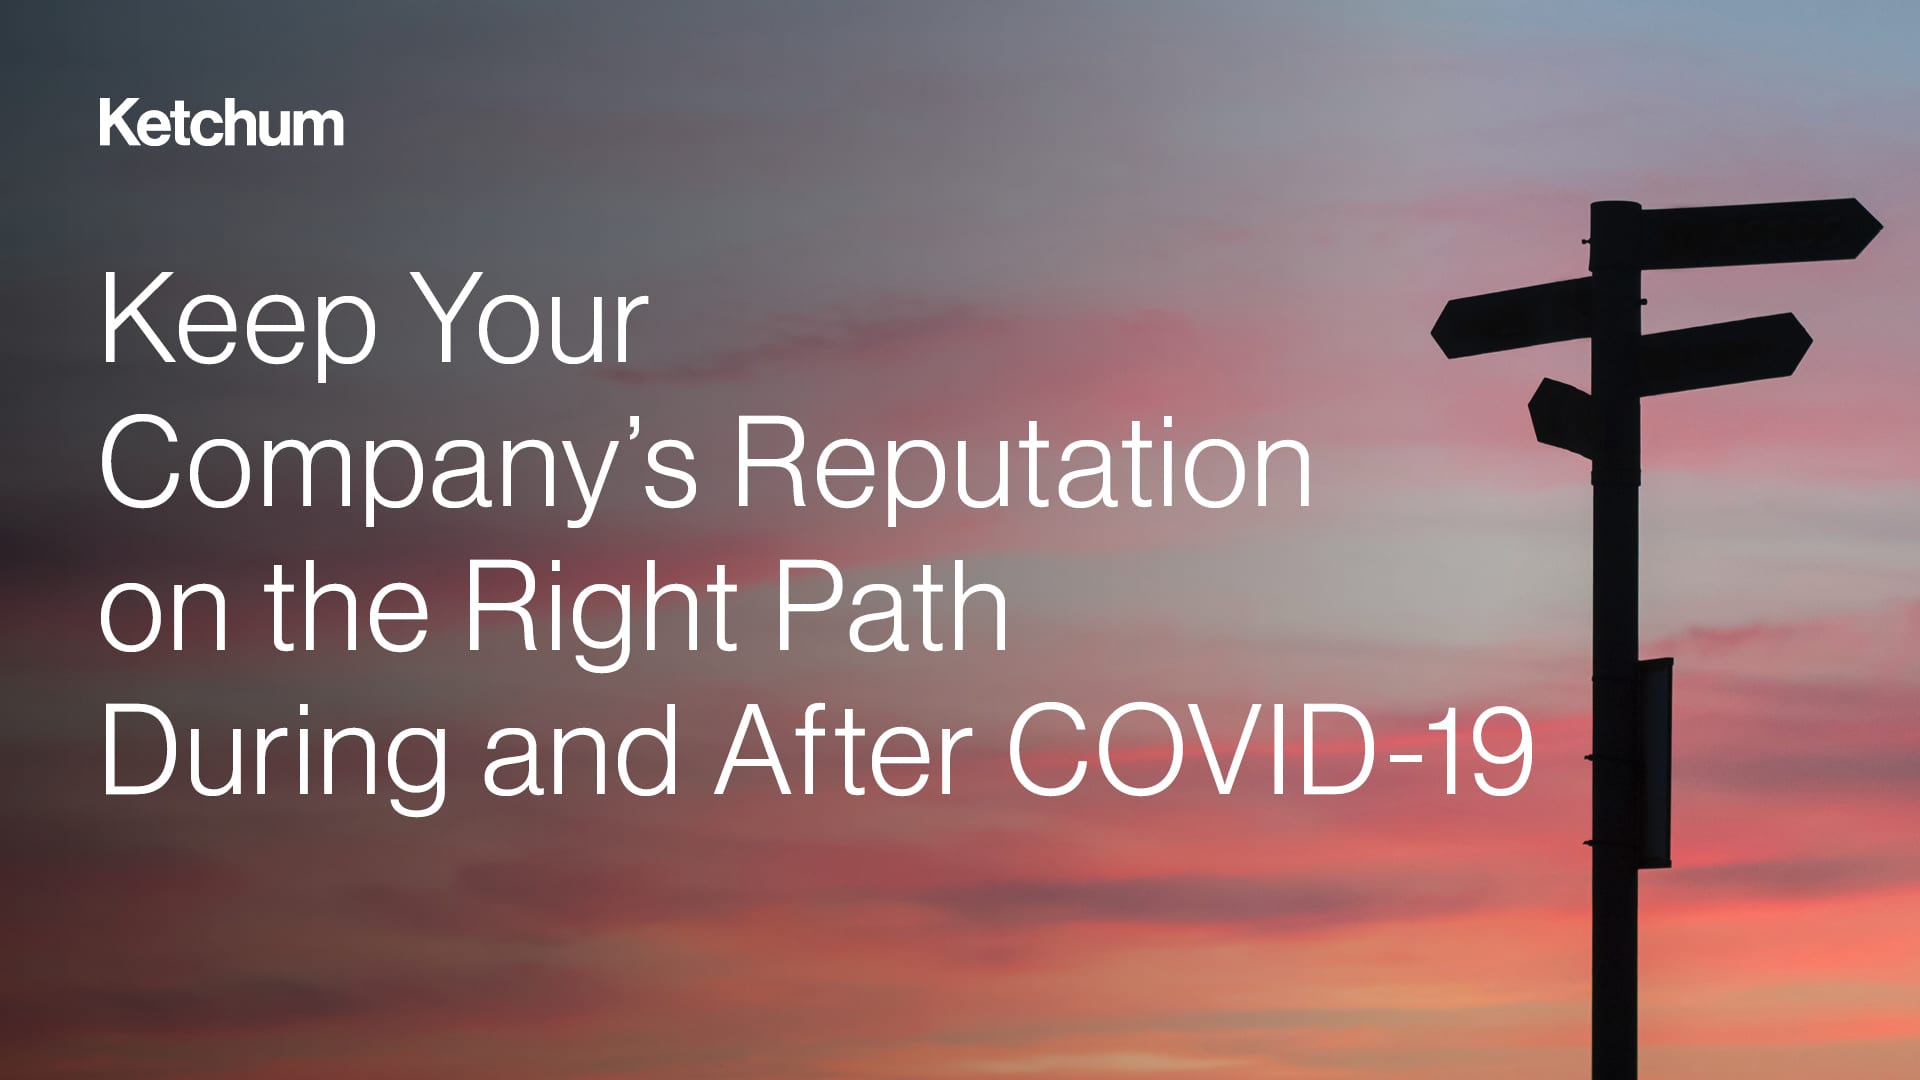 Keep Your Company’s Reputation on the Right Path During and After COVID-19